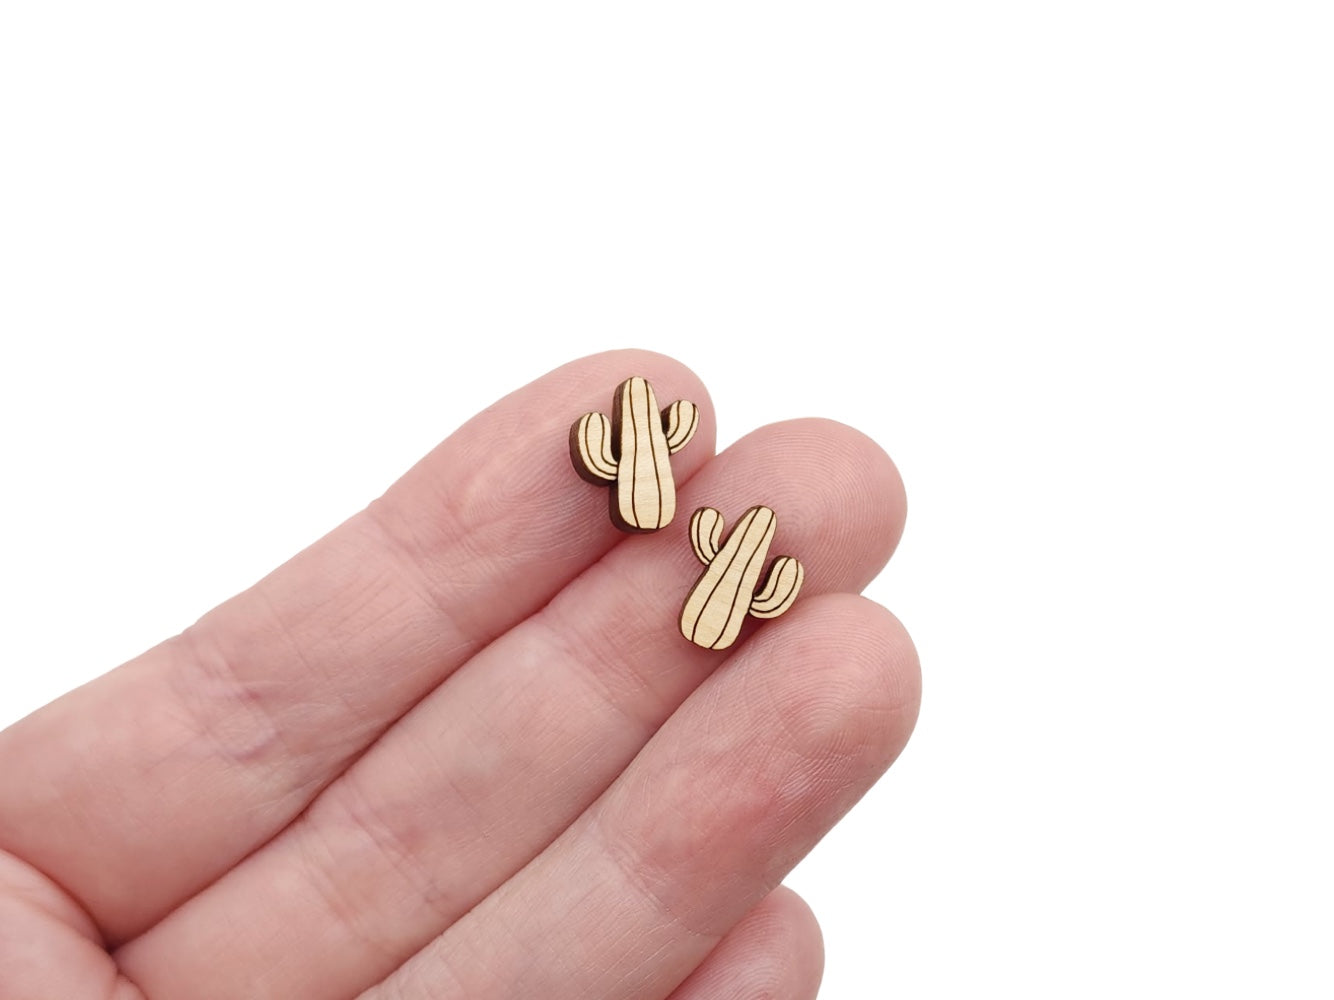 a hand holding a pair of wooden cabochon stud earring blanks cut and engraved to look like a saguaro cactus